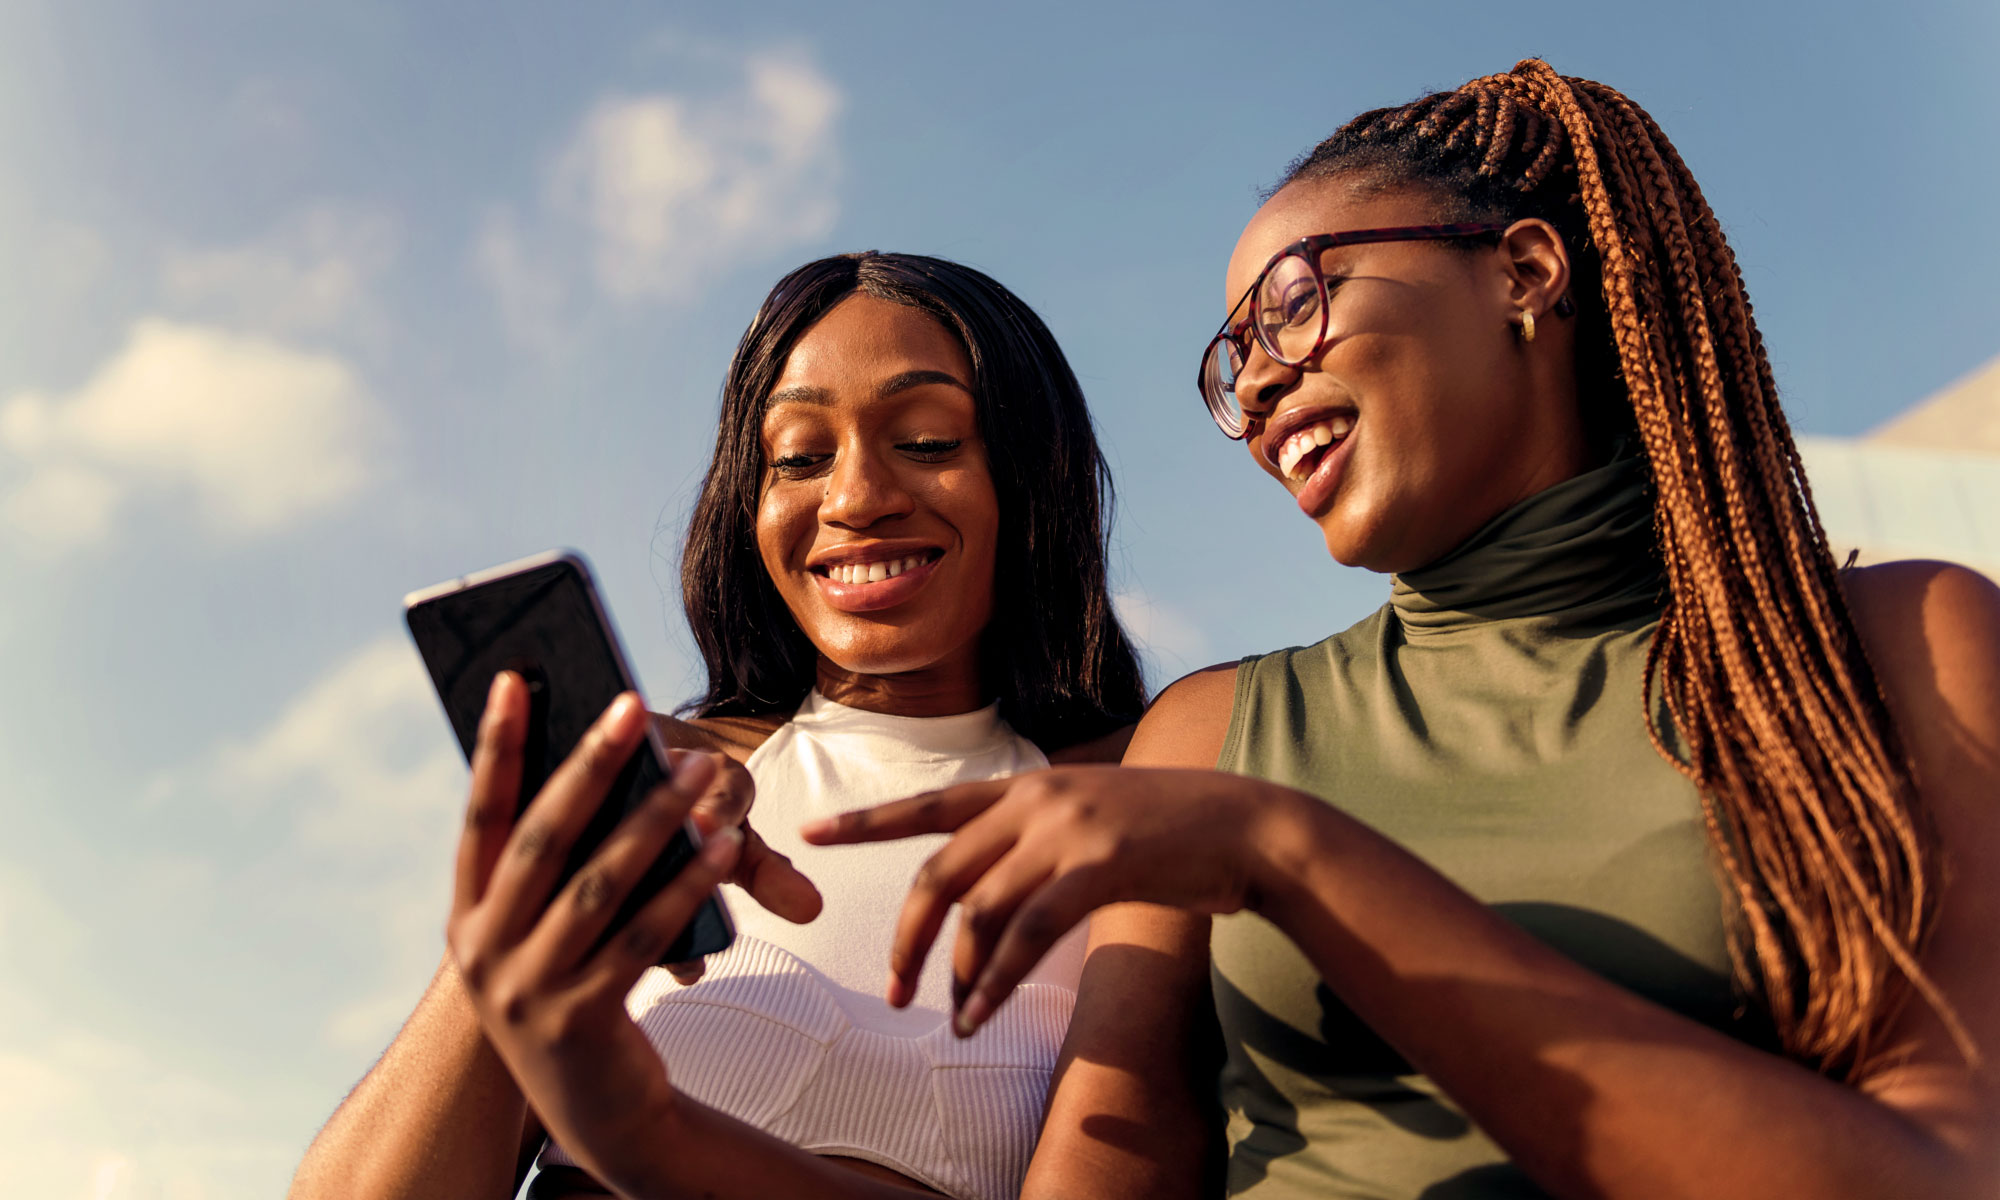 Two young adult women looking at a mobile phone